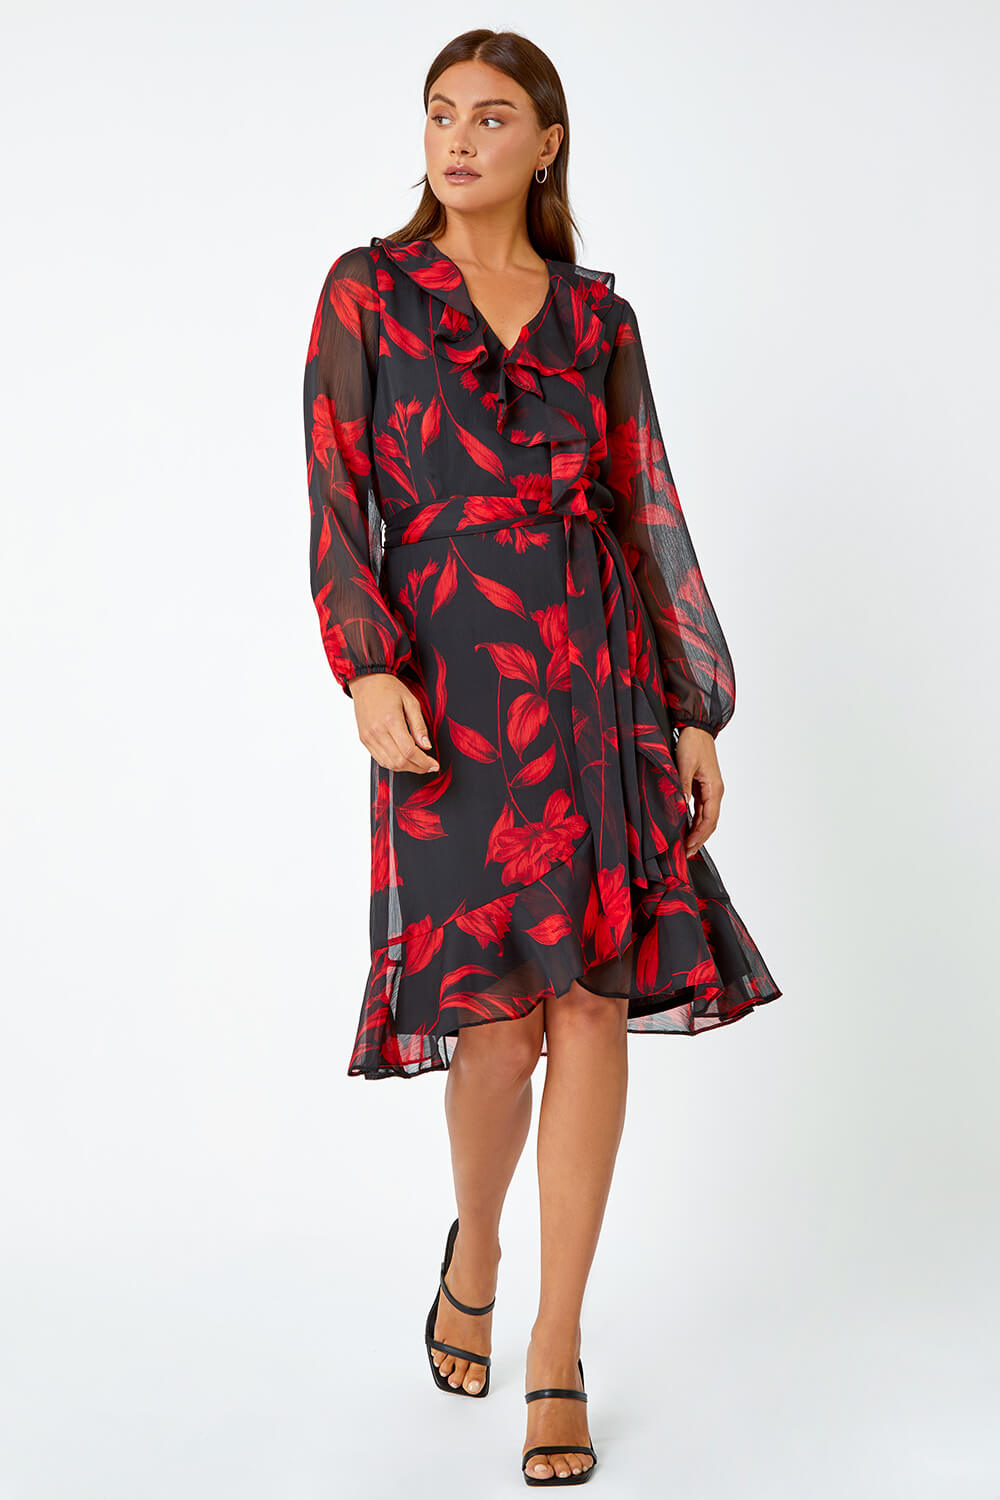 Red Floral Chiffon Frill Wrap Dress, Image 2 of 5